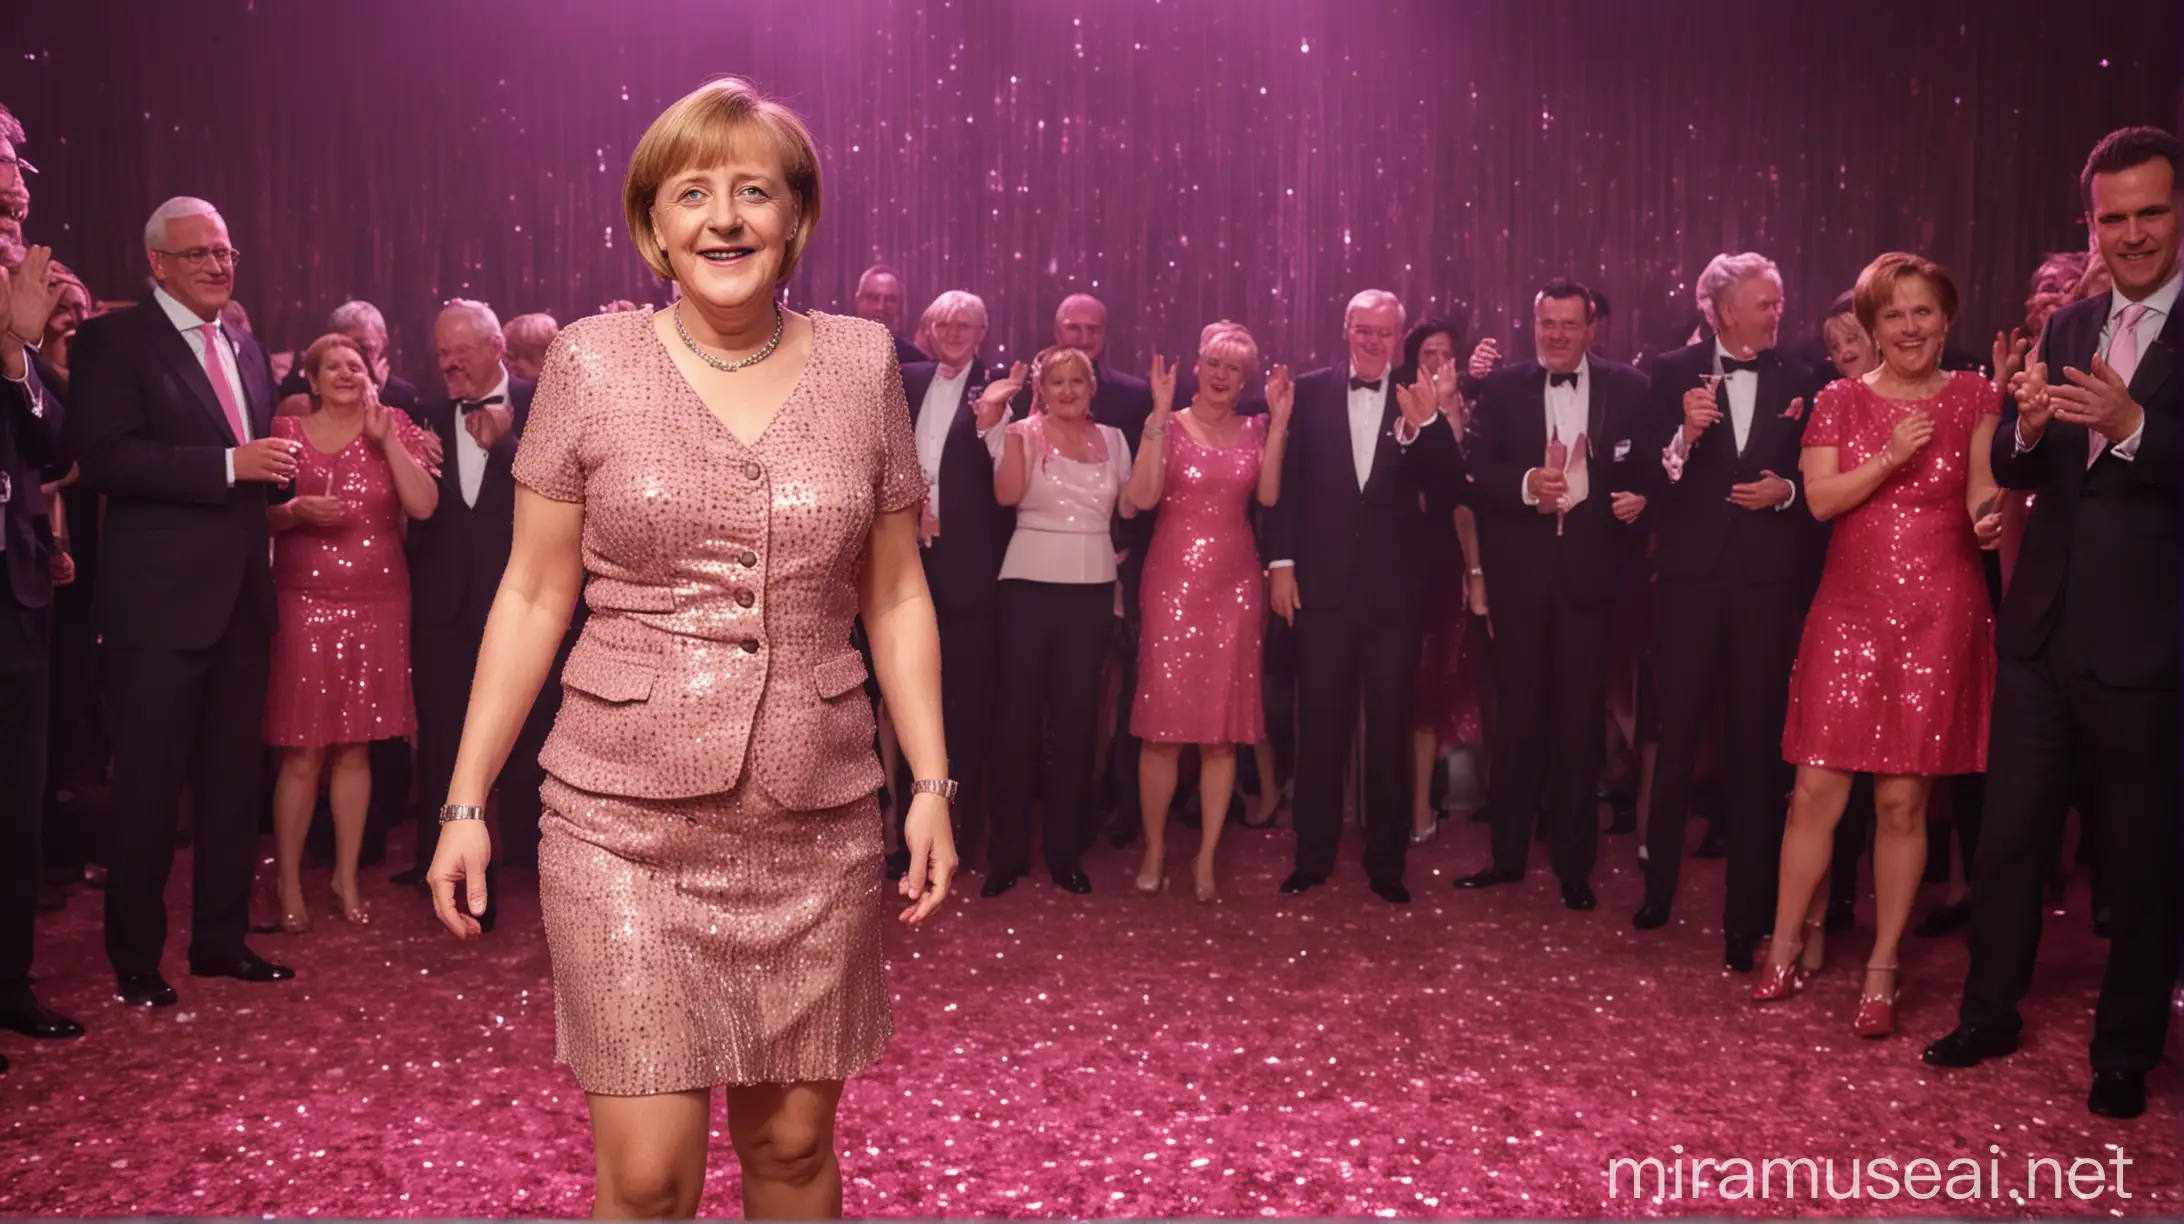 Full body and LOOKING AT The CAMERA photograph of Angela Merkel The Chancellor of Germany wearing pink sequined dress and standing straight, high detailed, happy face, standing in a dance floor.